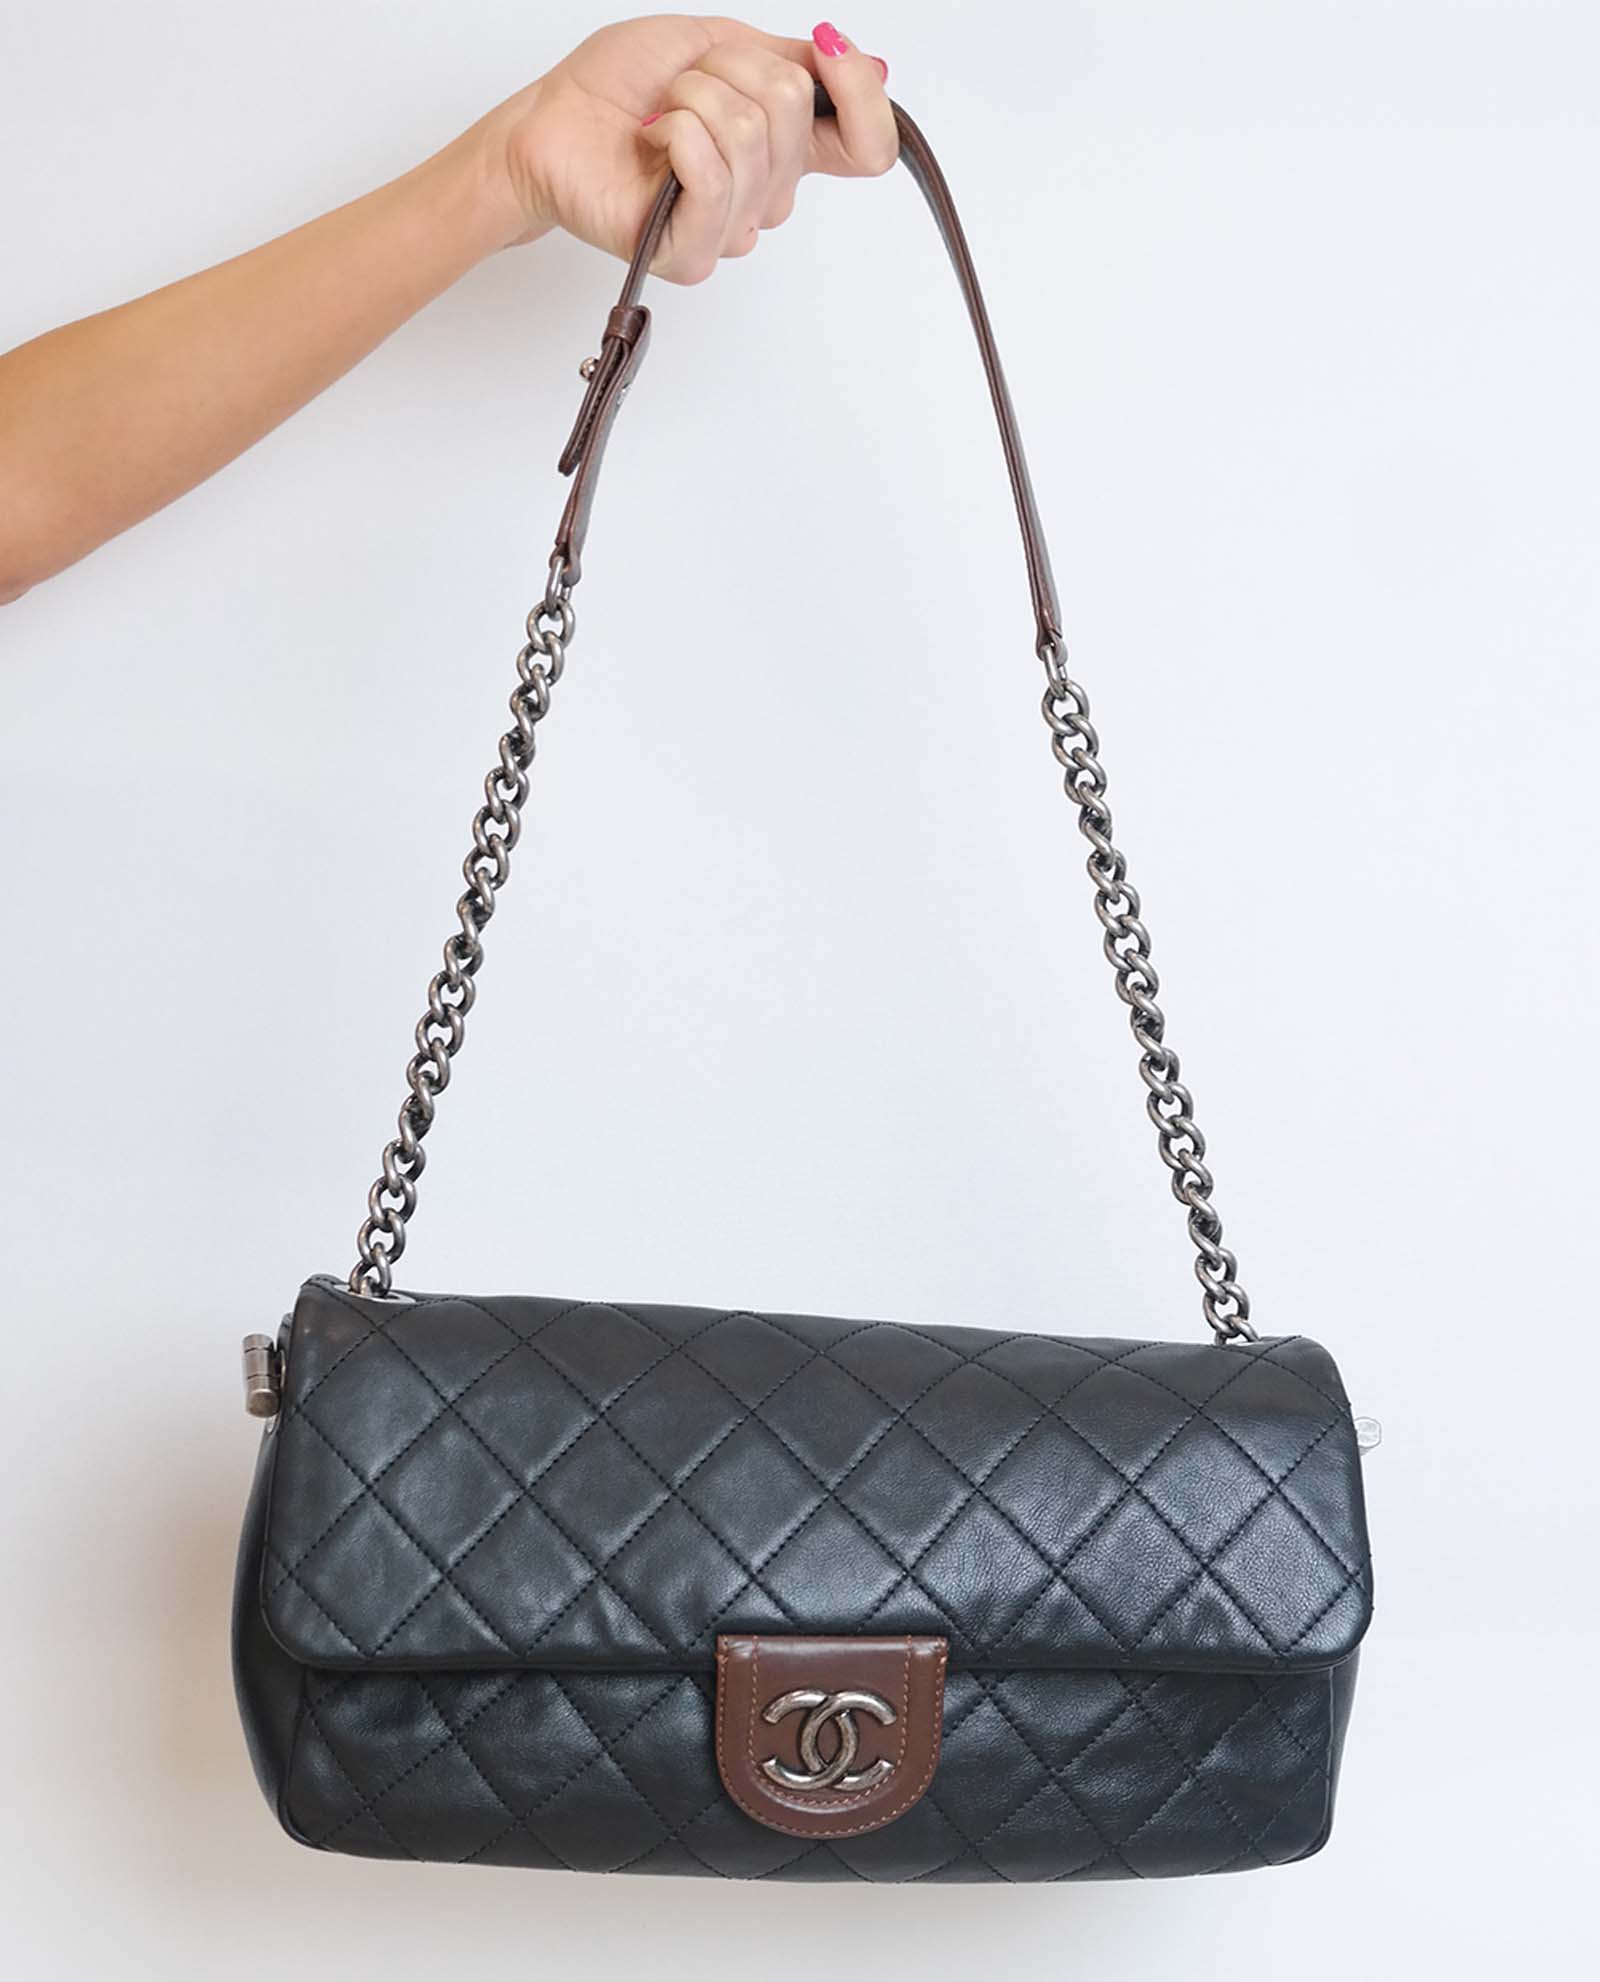 Arriba 39+ imagen chanel country chic flap bag